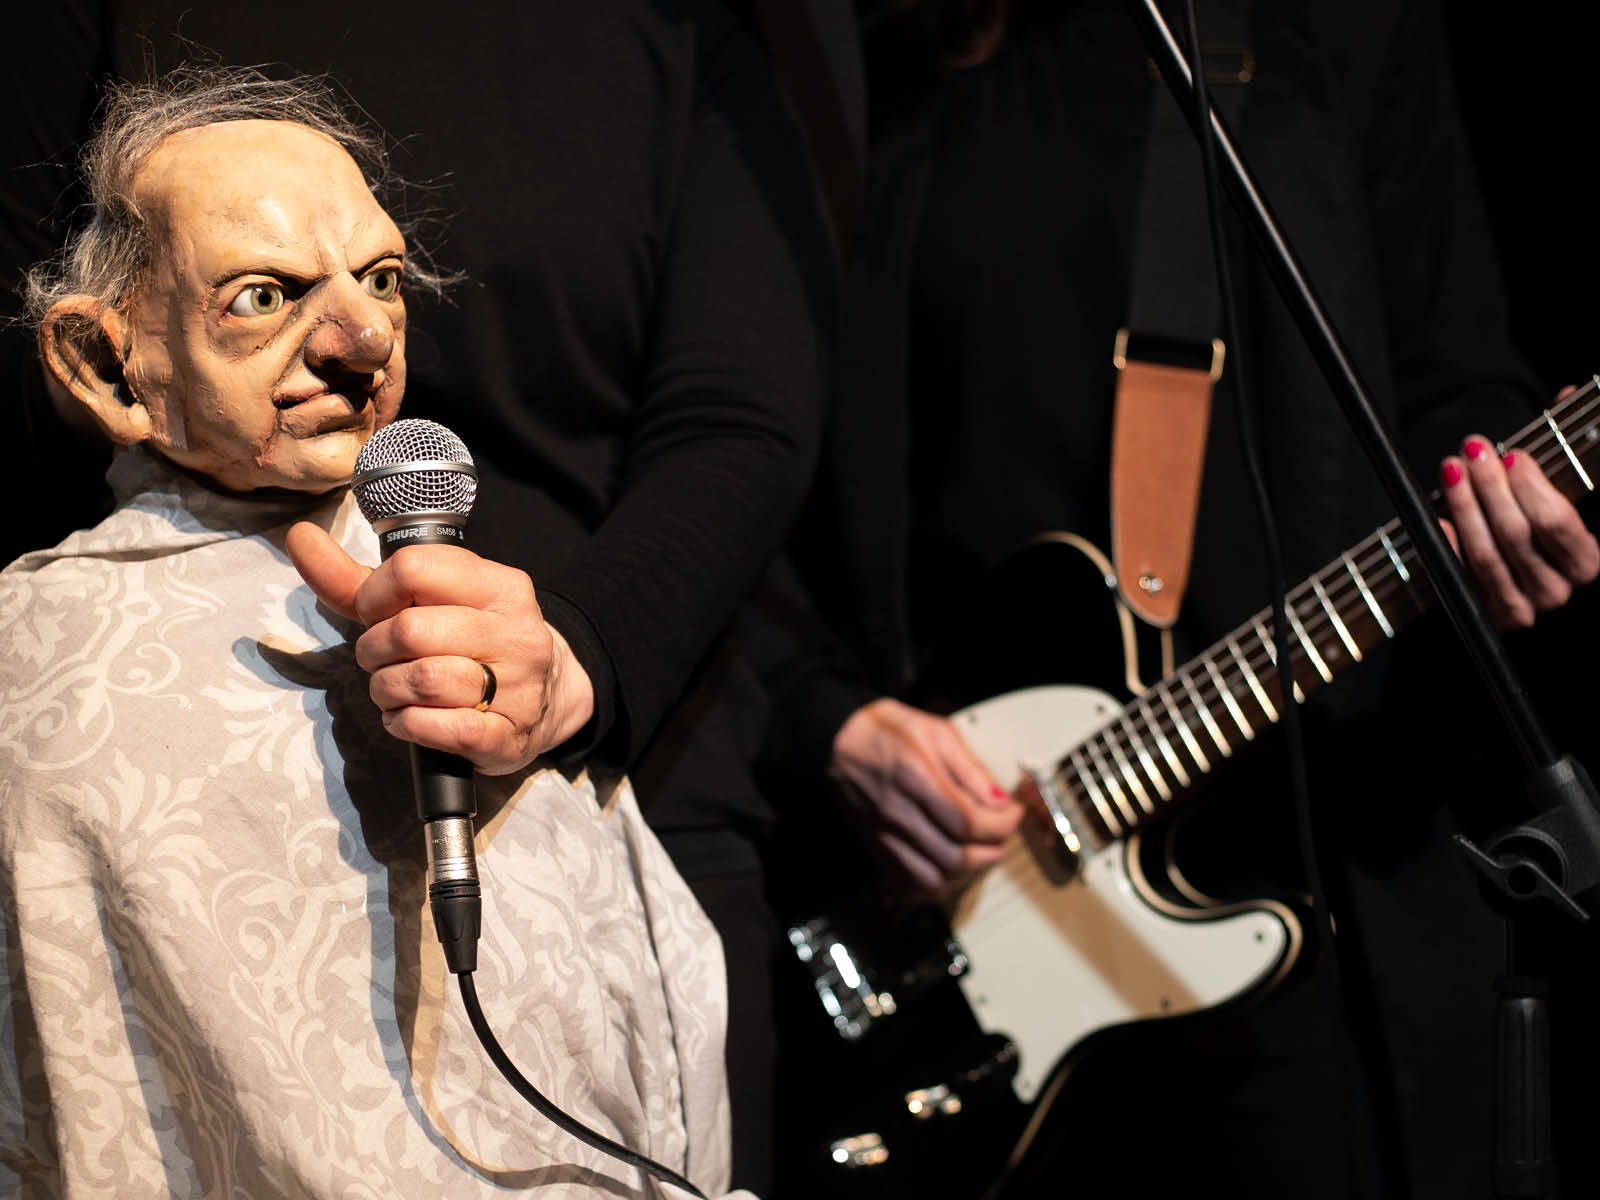 The puppet of an old man with a half bald head and deep facial furrows holds a microphone in front of his face. A person plays an electric guitar in the background.